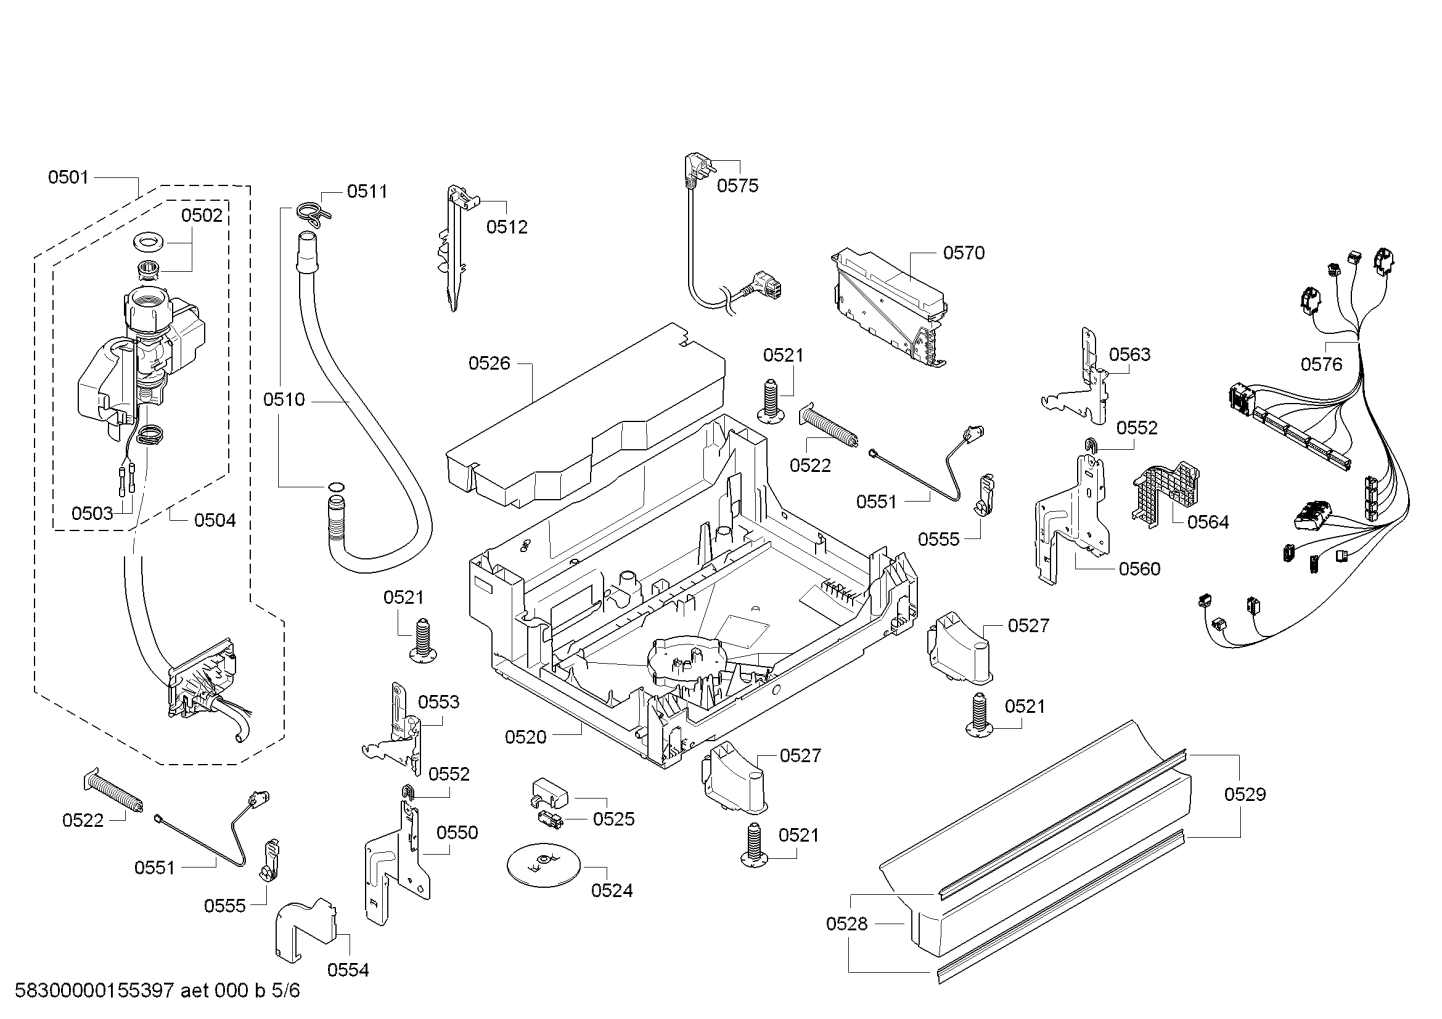 drawing_link_11_device_1621547